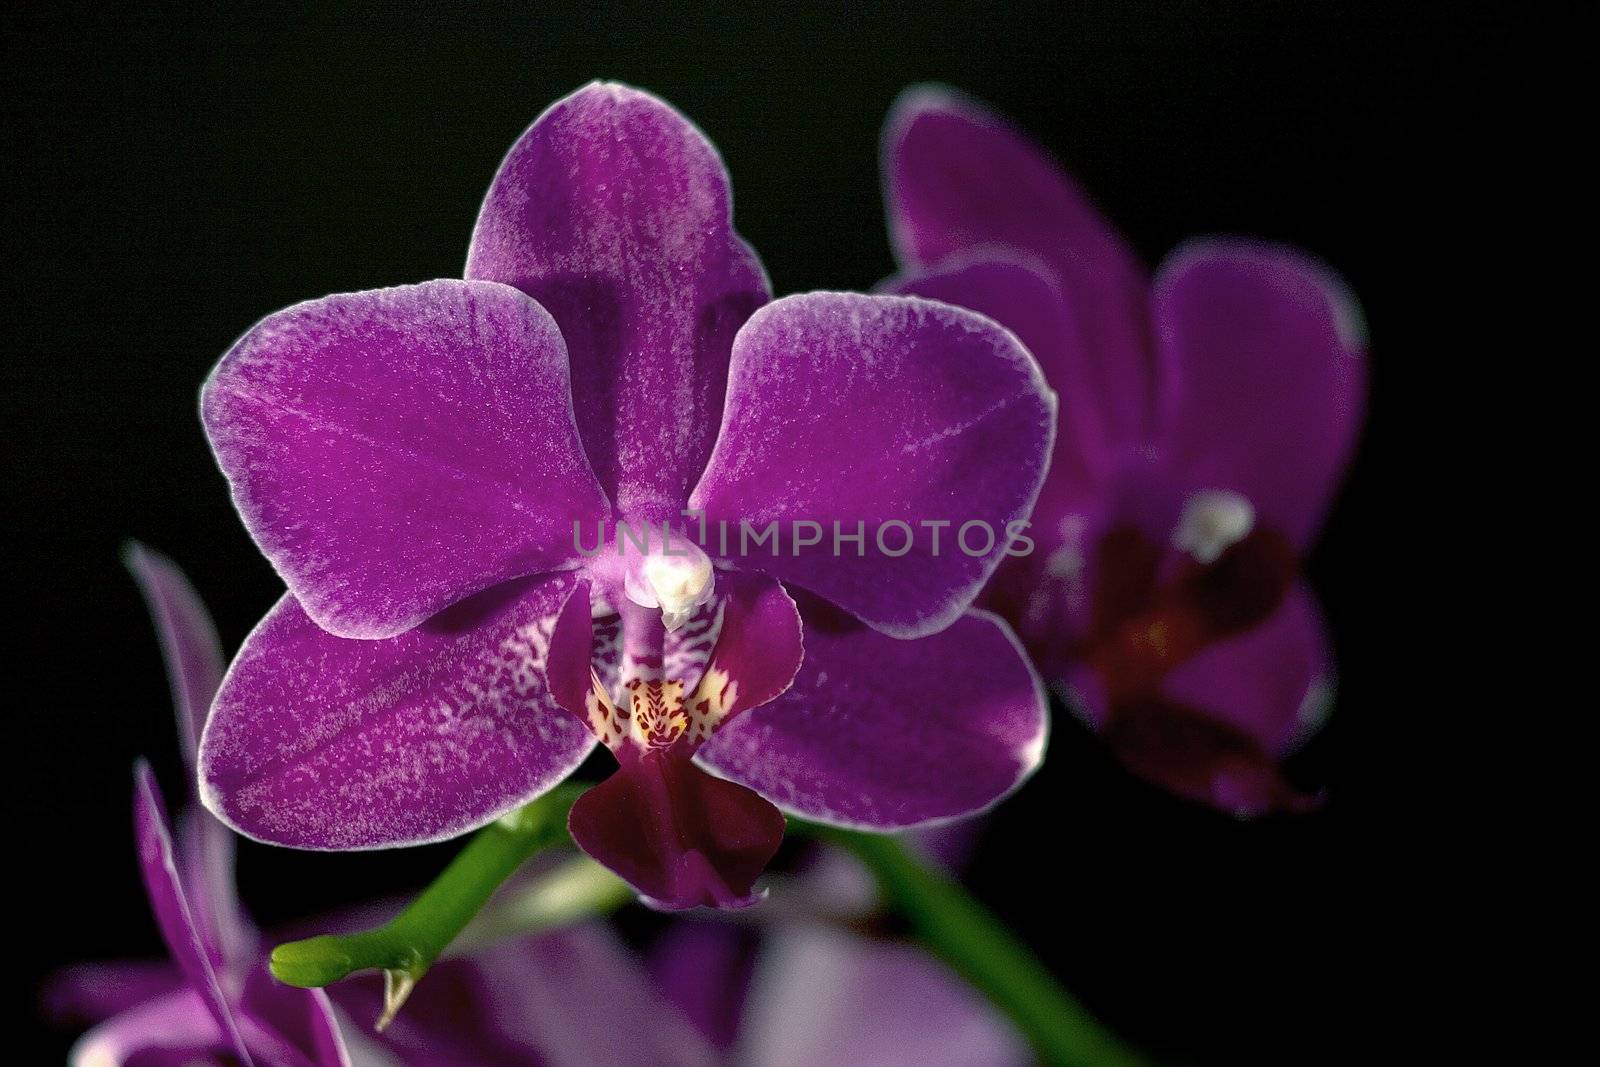 pink orchids against a black background by miradrozdowski